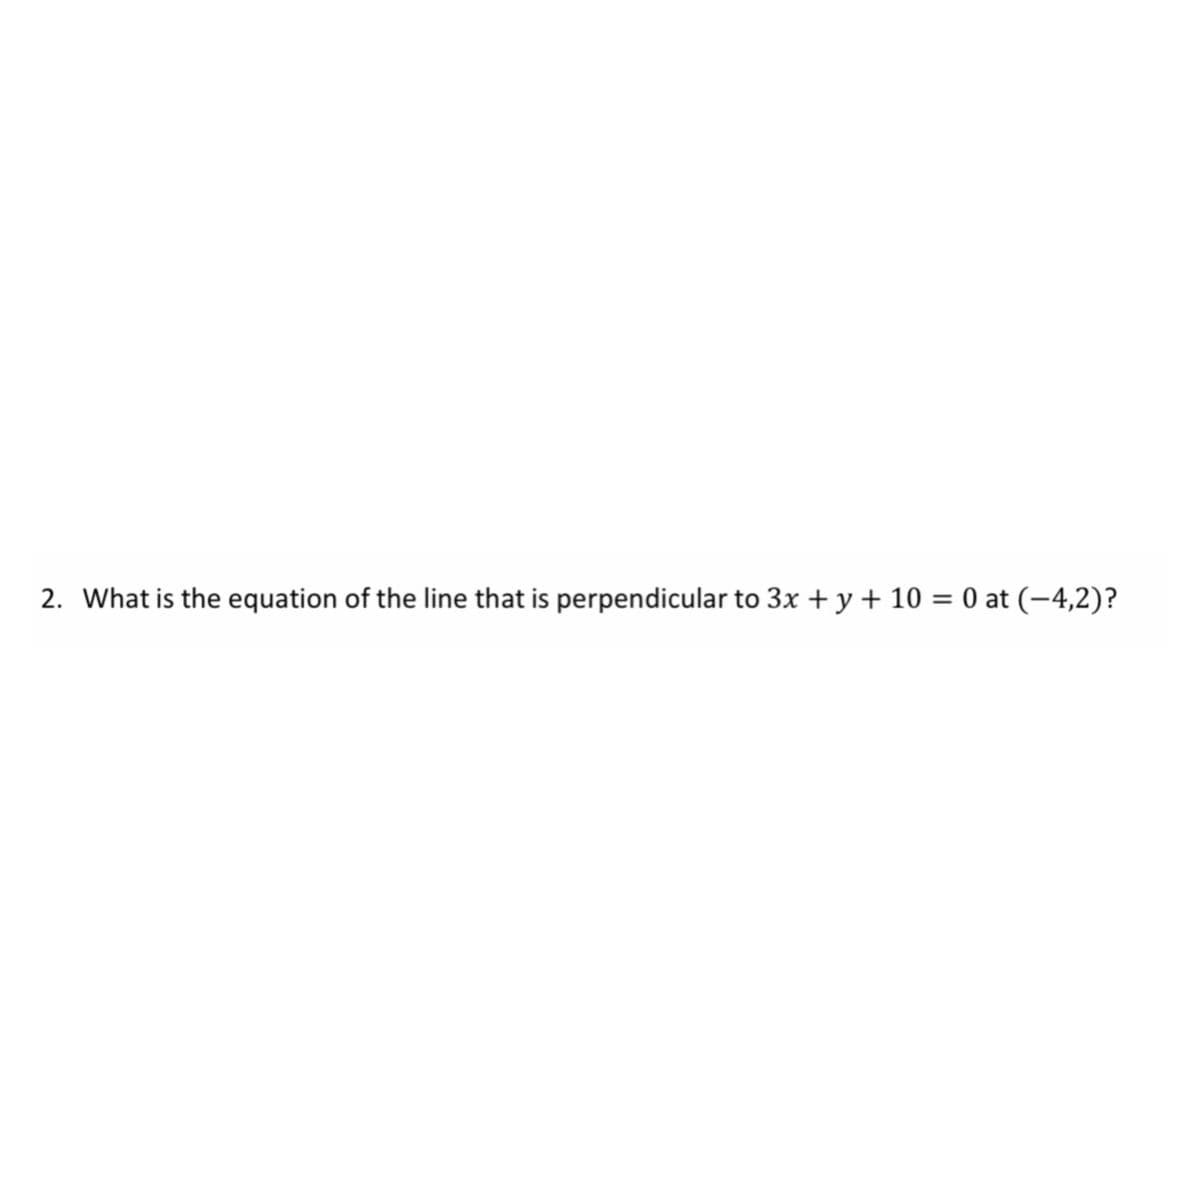 2. What is the equation of the line that is perpendicular to 3x + y+ 10 = 0 at (-4,2)?
